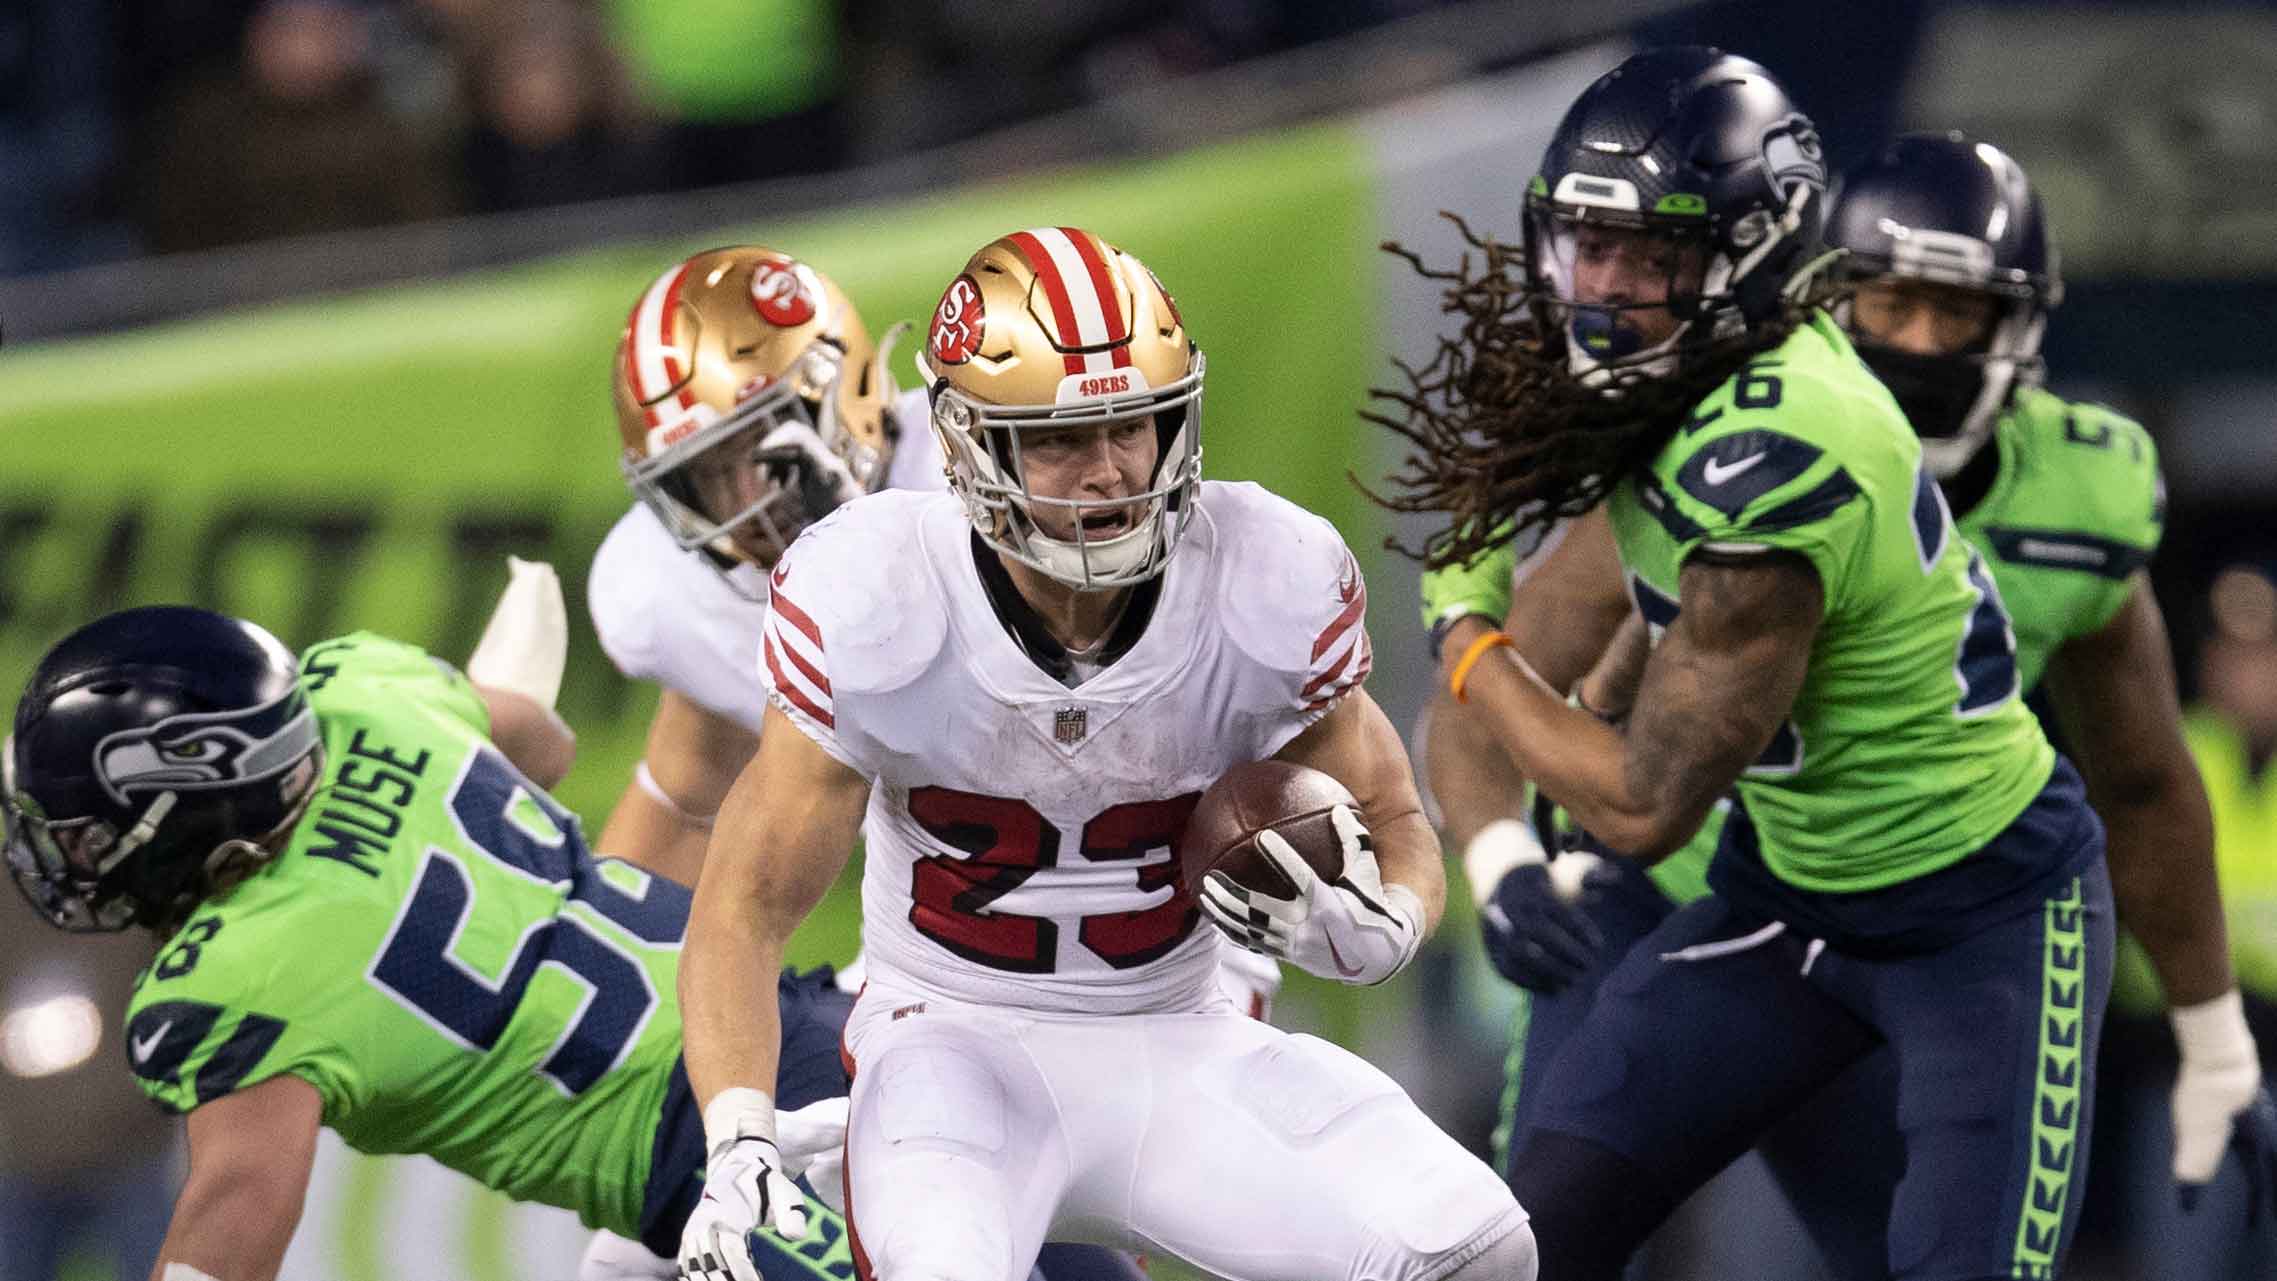 Seahawks vs. 49ers live stream: TV channel, how to watch